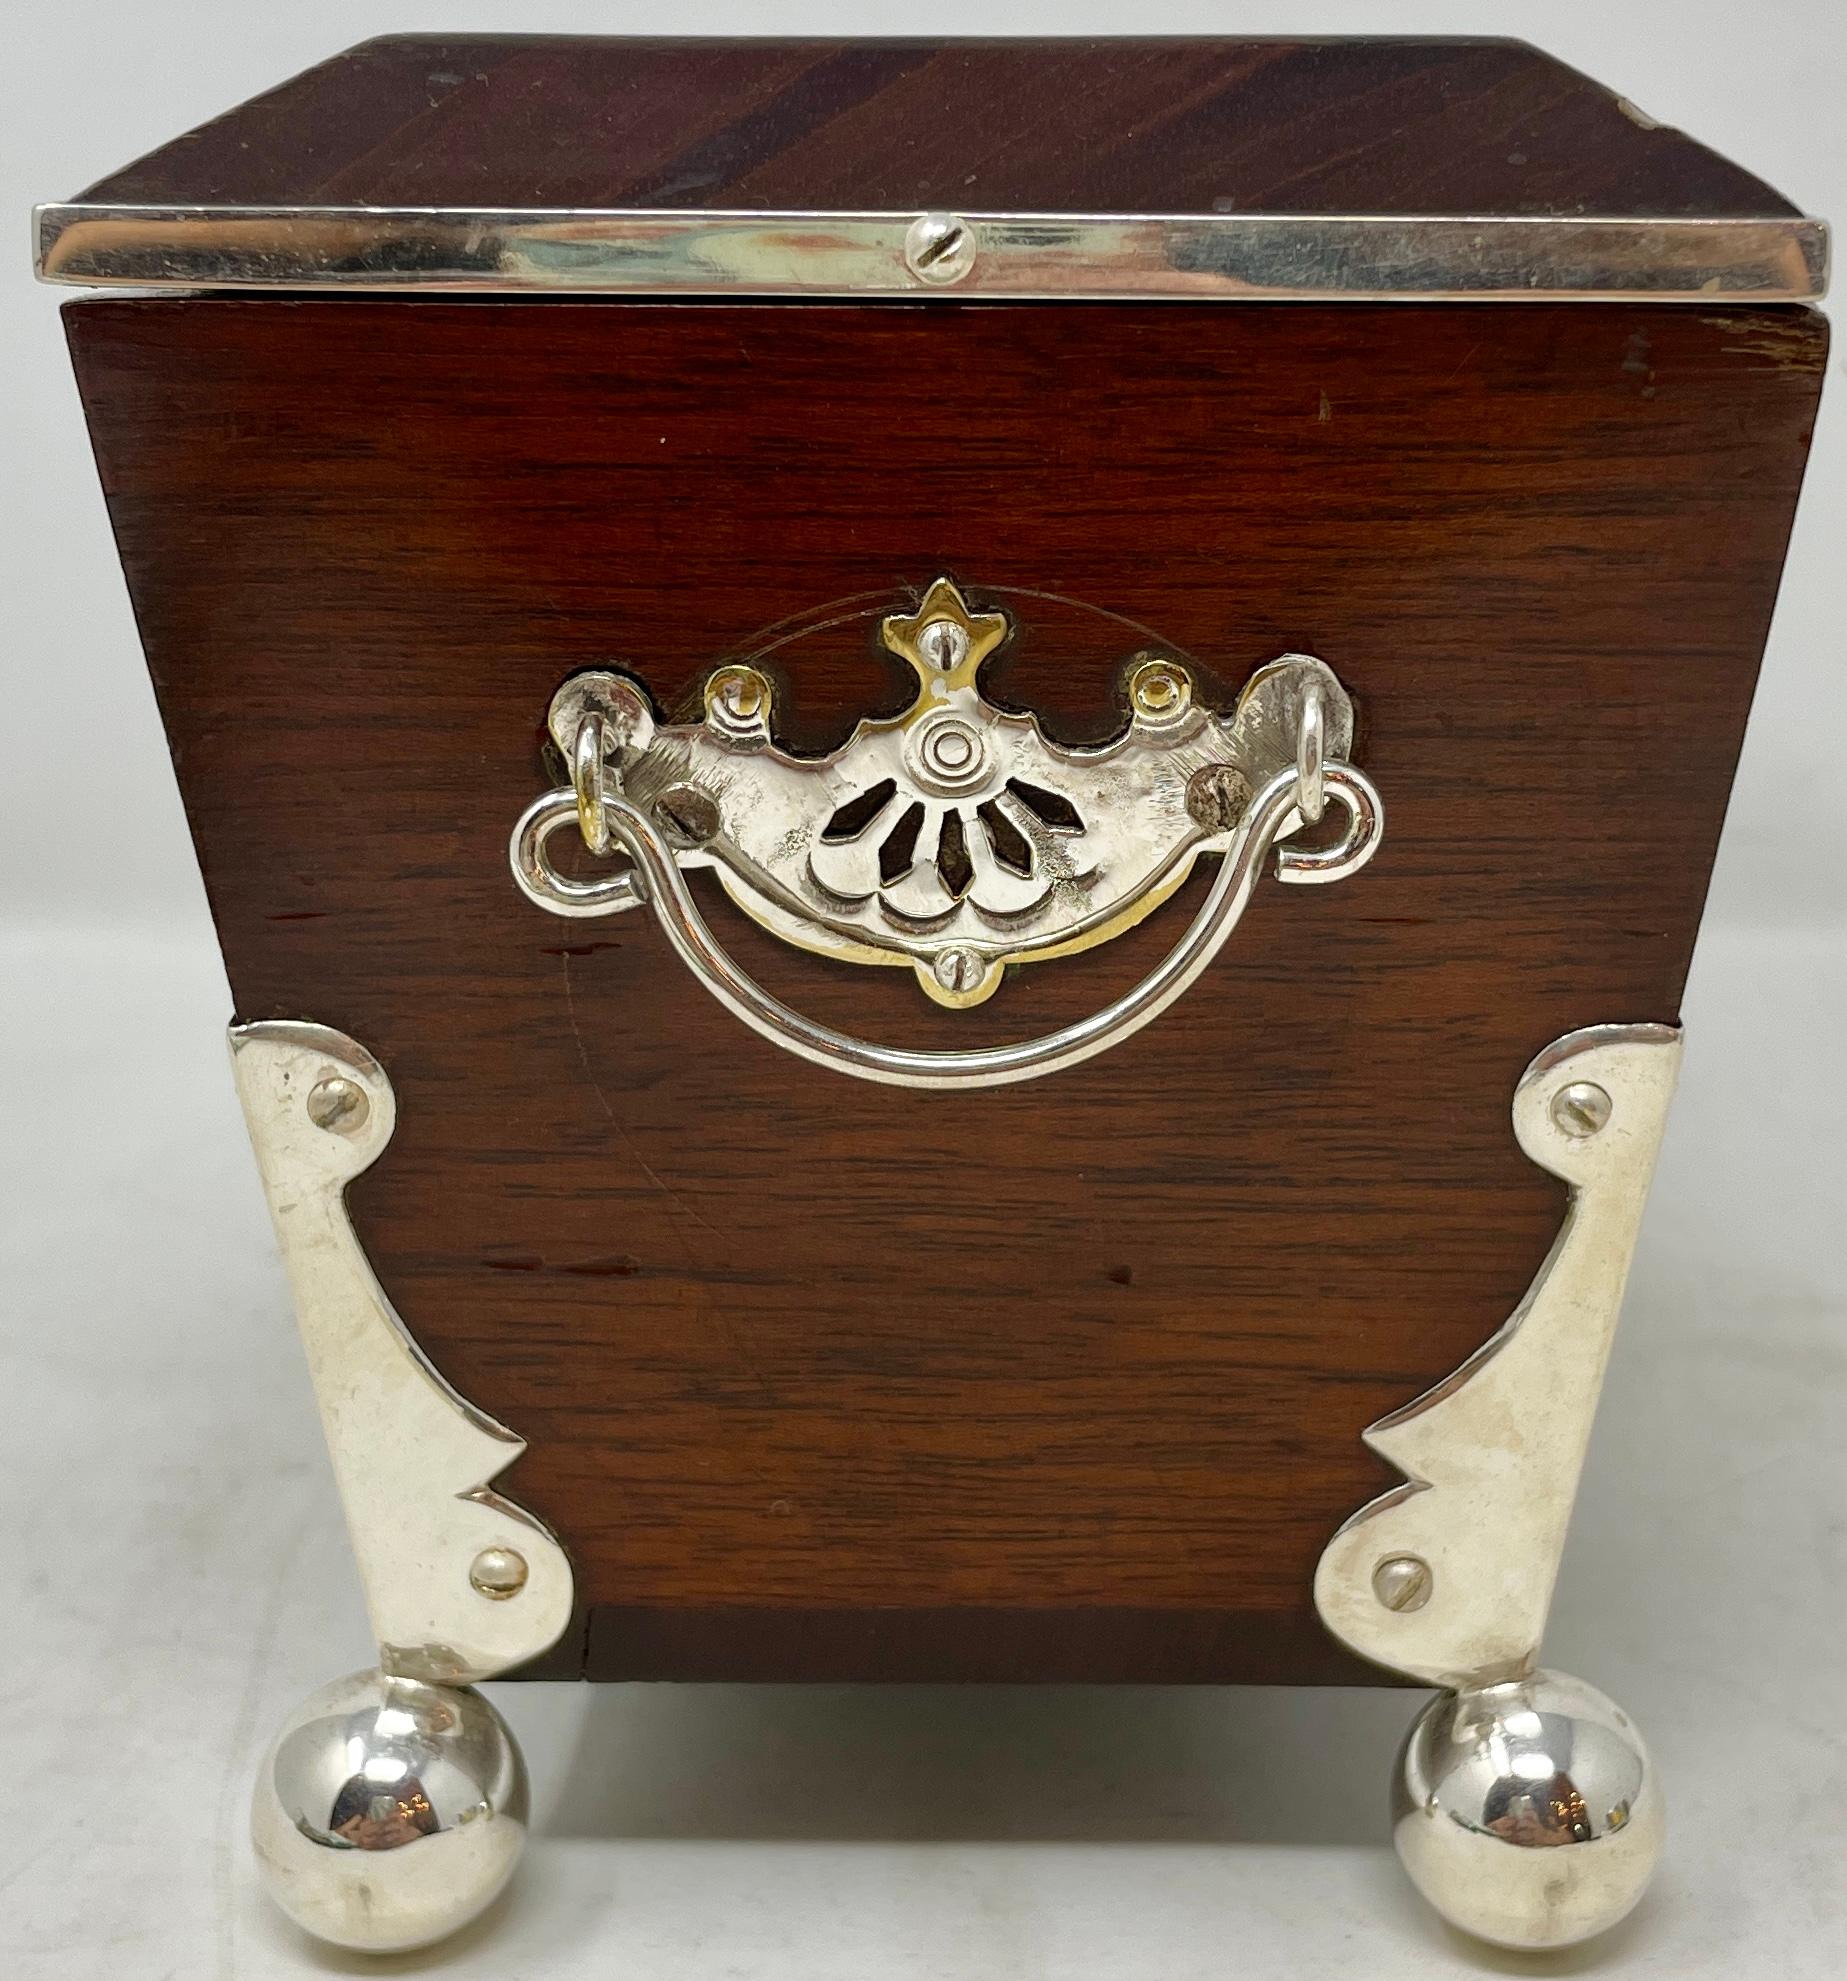 19th Century Antique English Victorian Mahogany Tea Caddy with Silver-Plated Mounts, Ca 1890